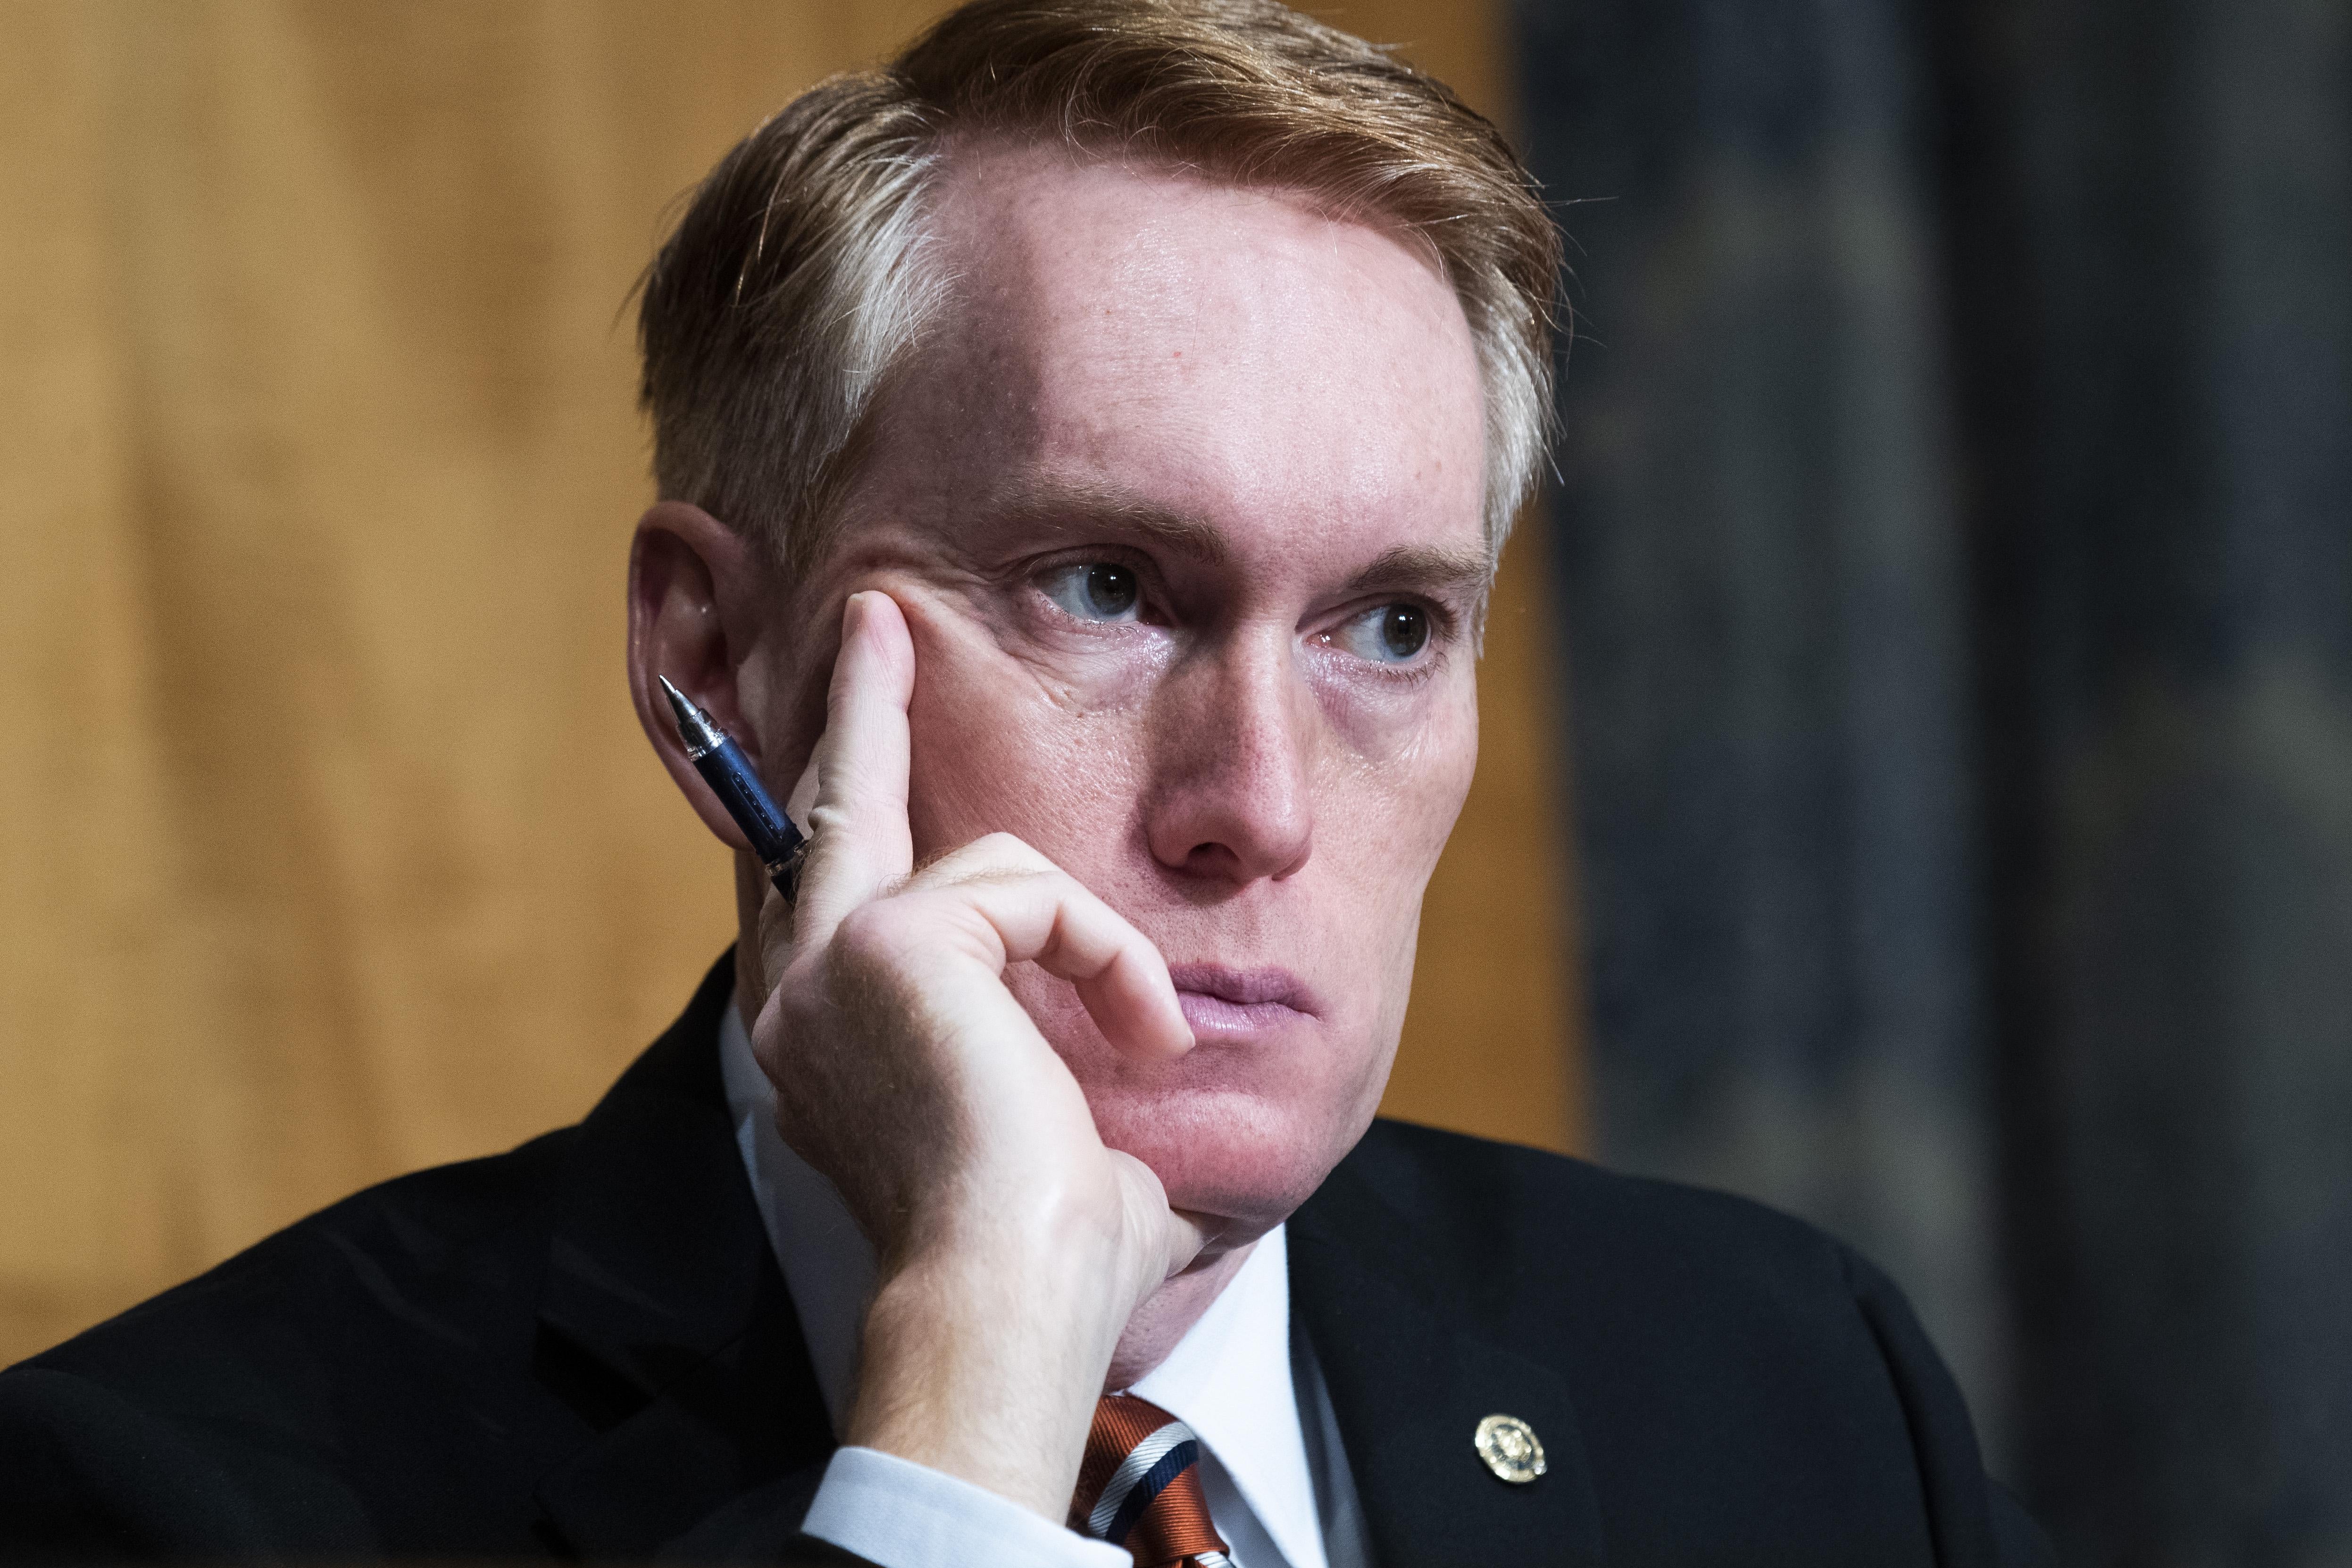 Republican Sen. James Lankford of Oklahoma sits with his hand, holding a pen, on his cheek. 